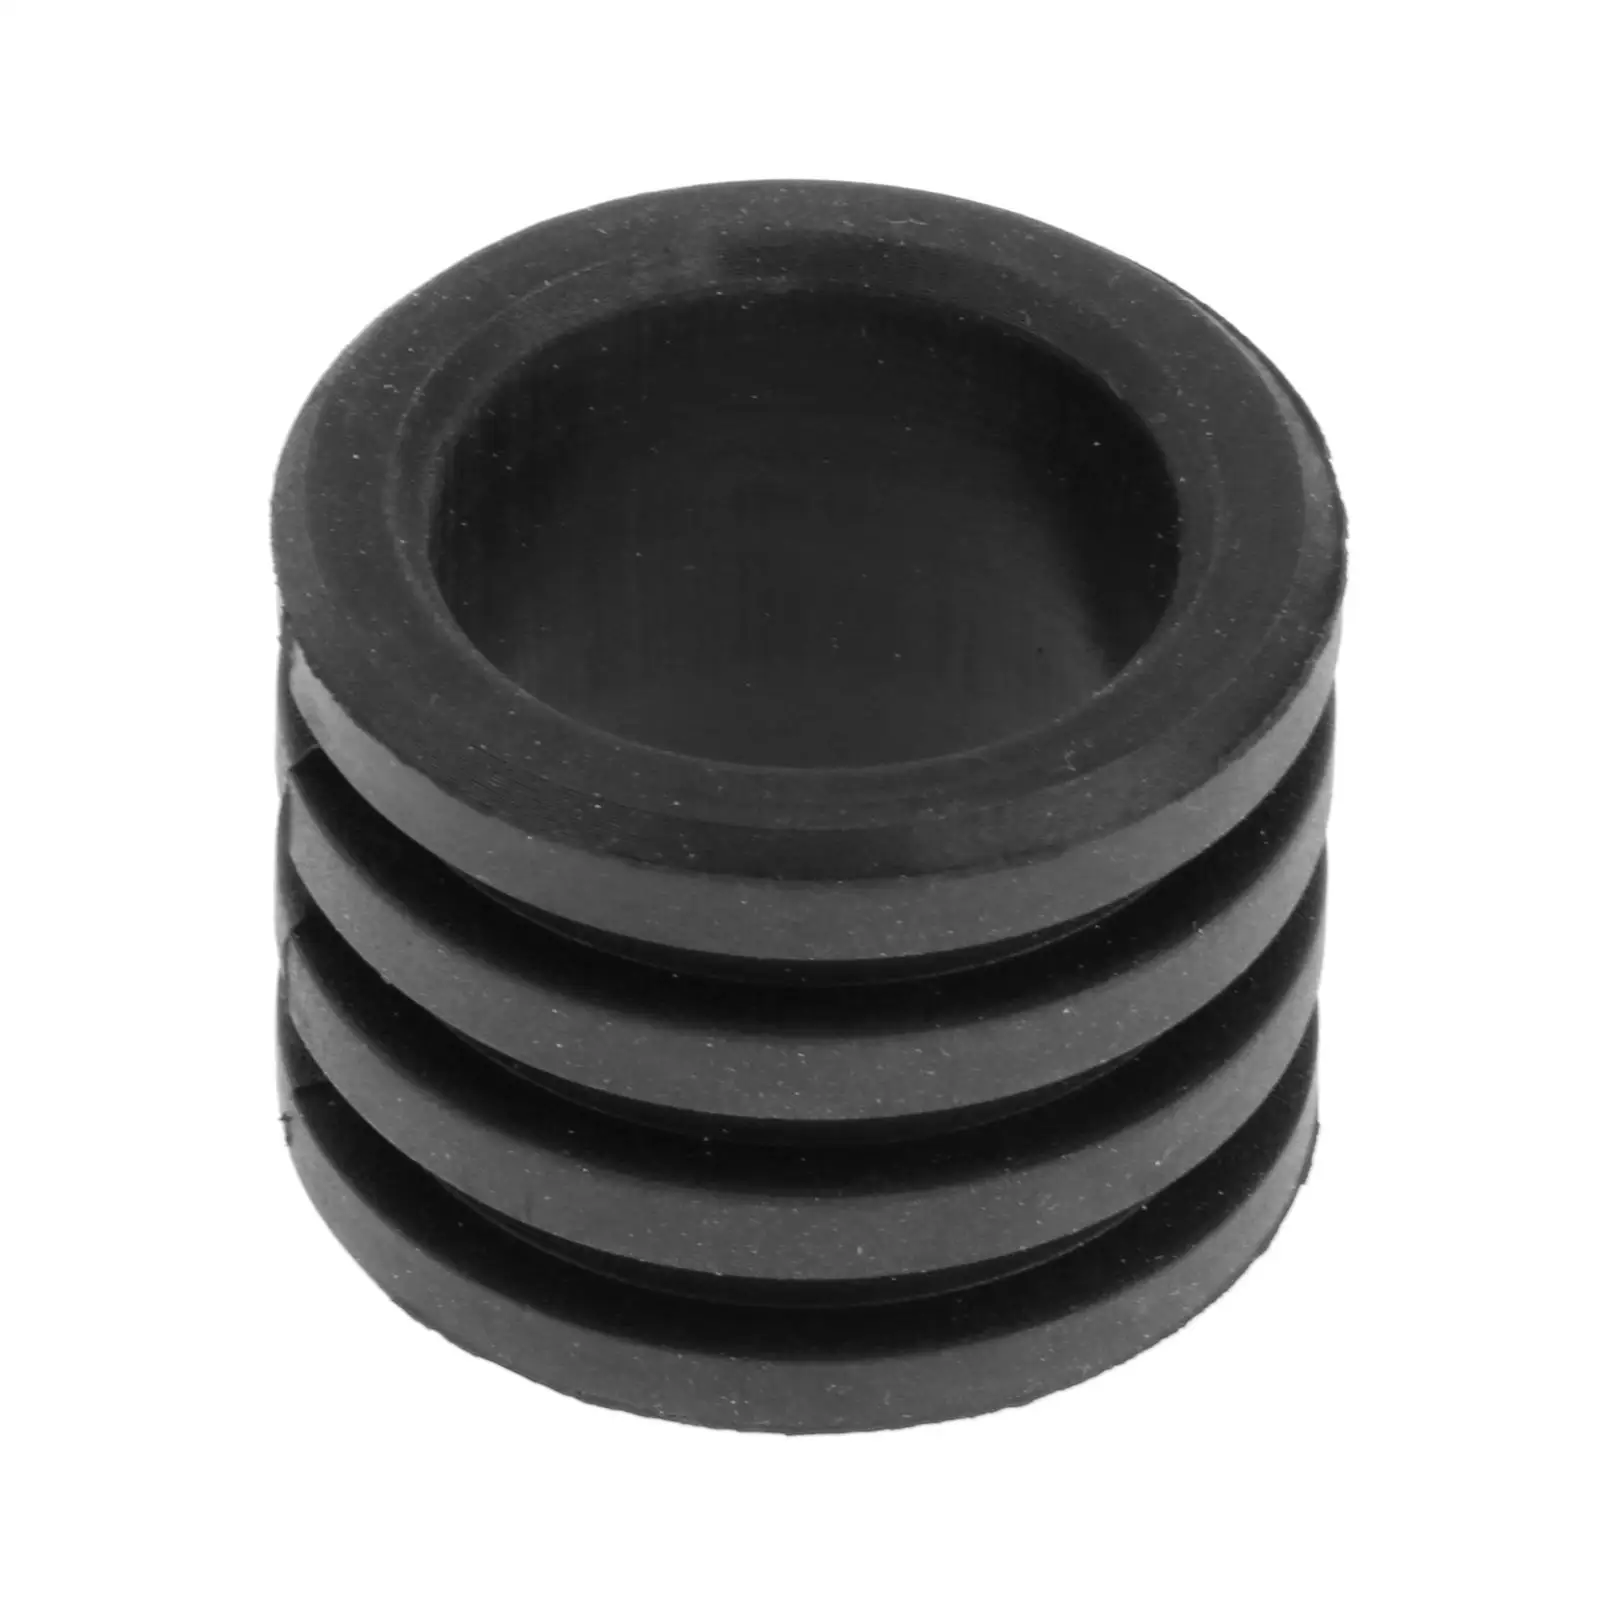 

Exhaust Gasket Rubber Flange fits for Honda 1984-07 CR250R CR 250 18365-KA4-730 ,Easy to Install